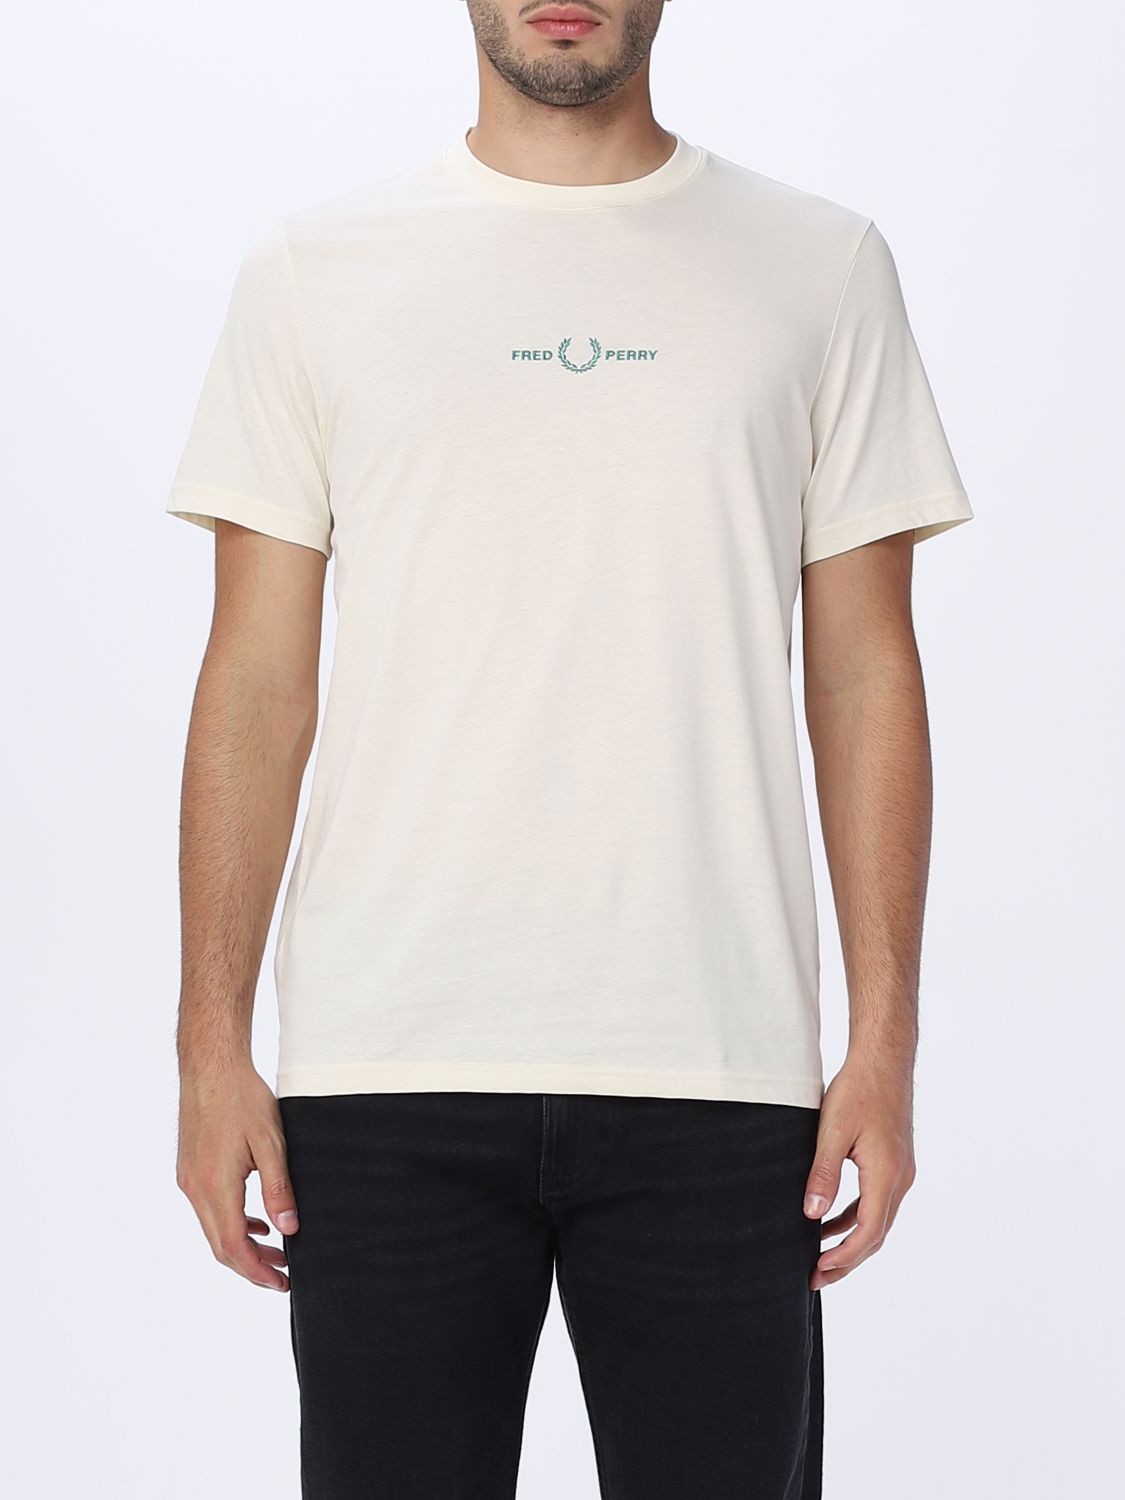 FRED PERRY T-SHIRT FRED PERRY MEN,376090022